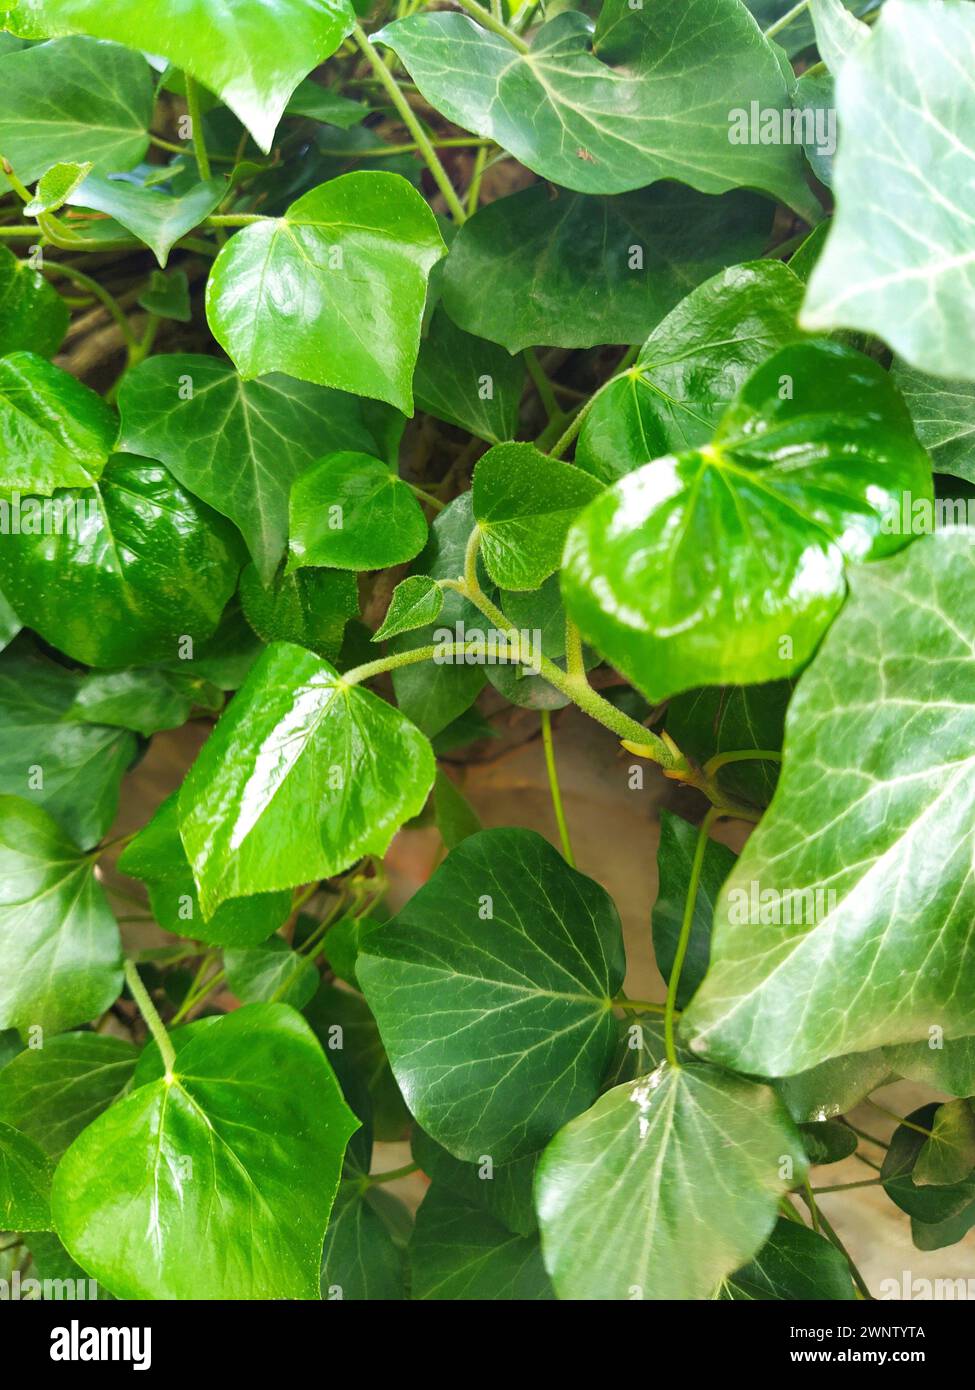 Leaves and young shoots of ivy climb up the wall. European forest. Creeping parasitic plant. Green foliage. Triangular Leaf. Common ivy or Hedera Stock Photo